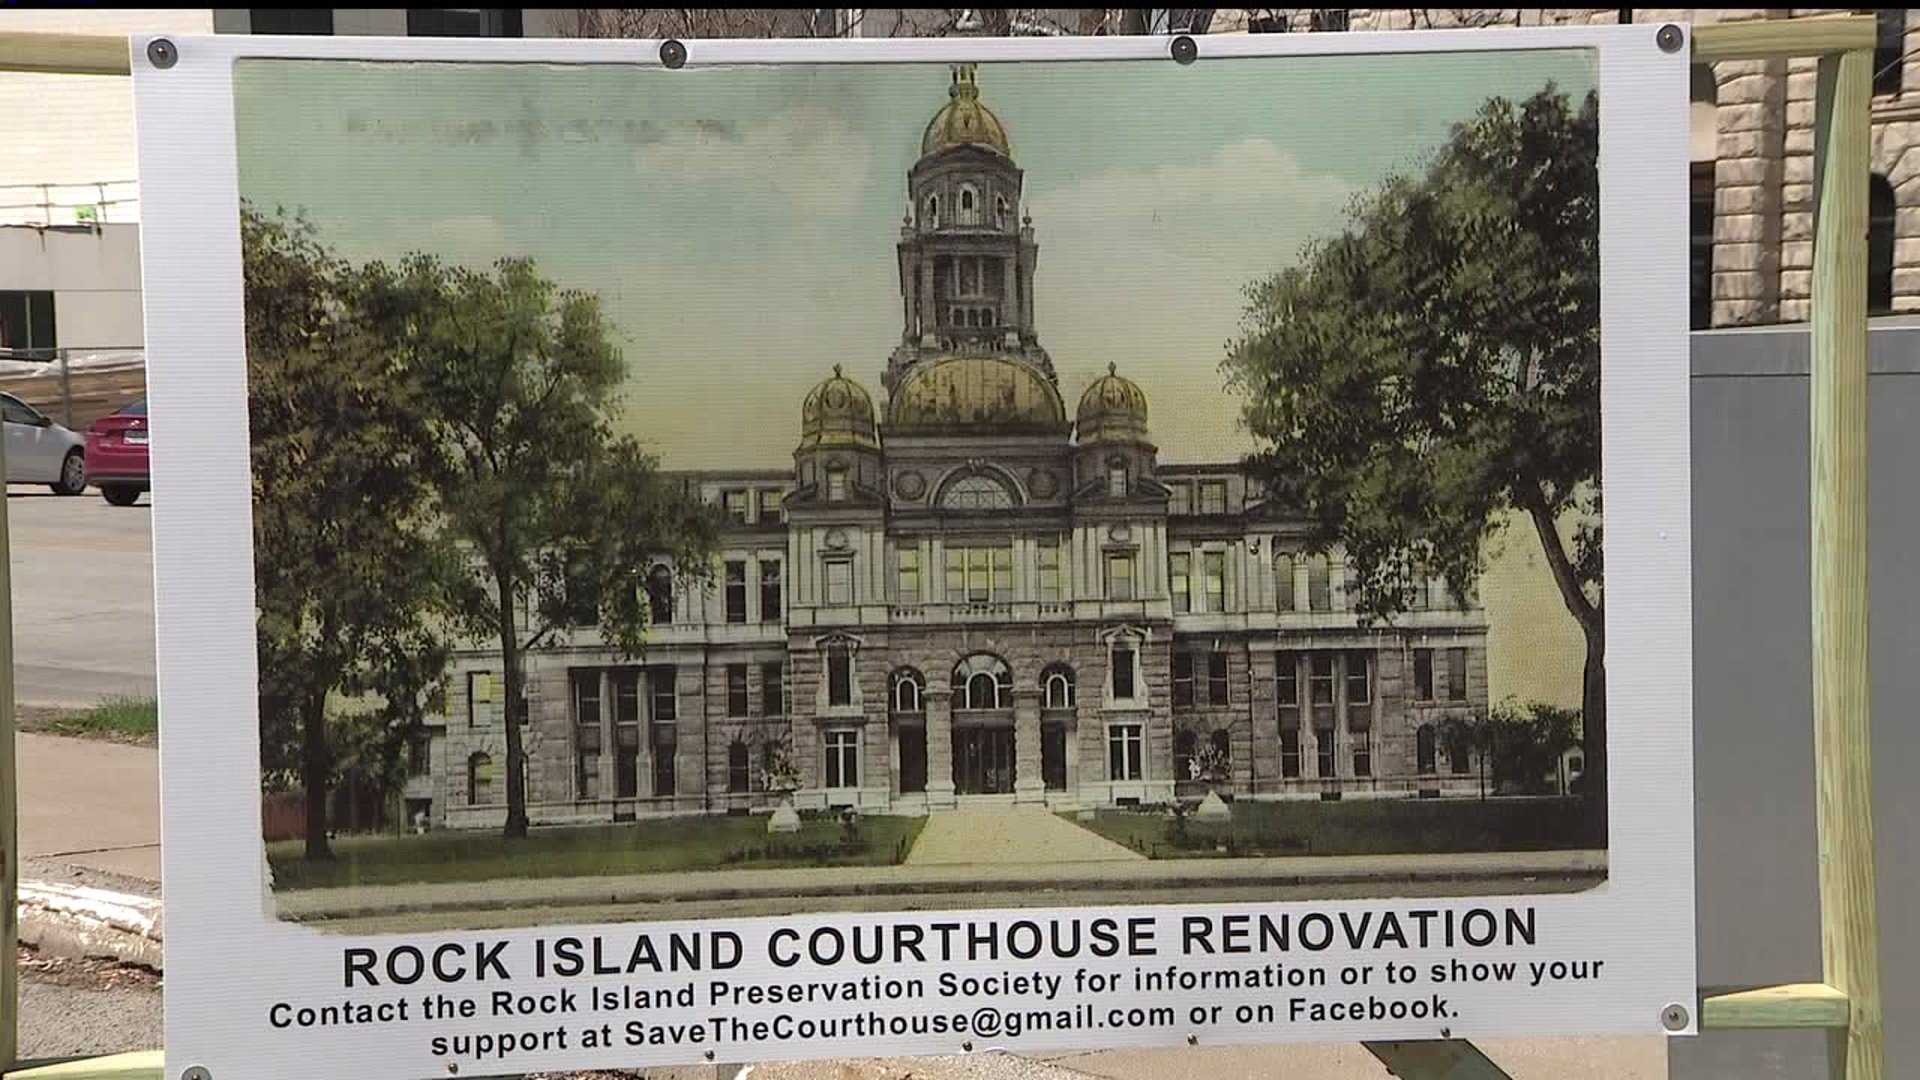 Demolition Challenge at the Rock Island Courthouse